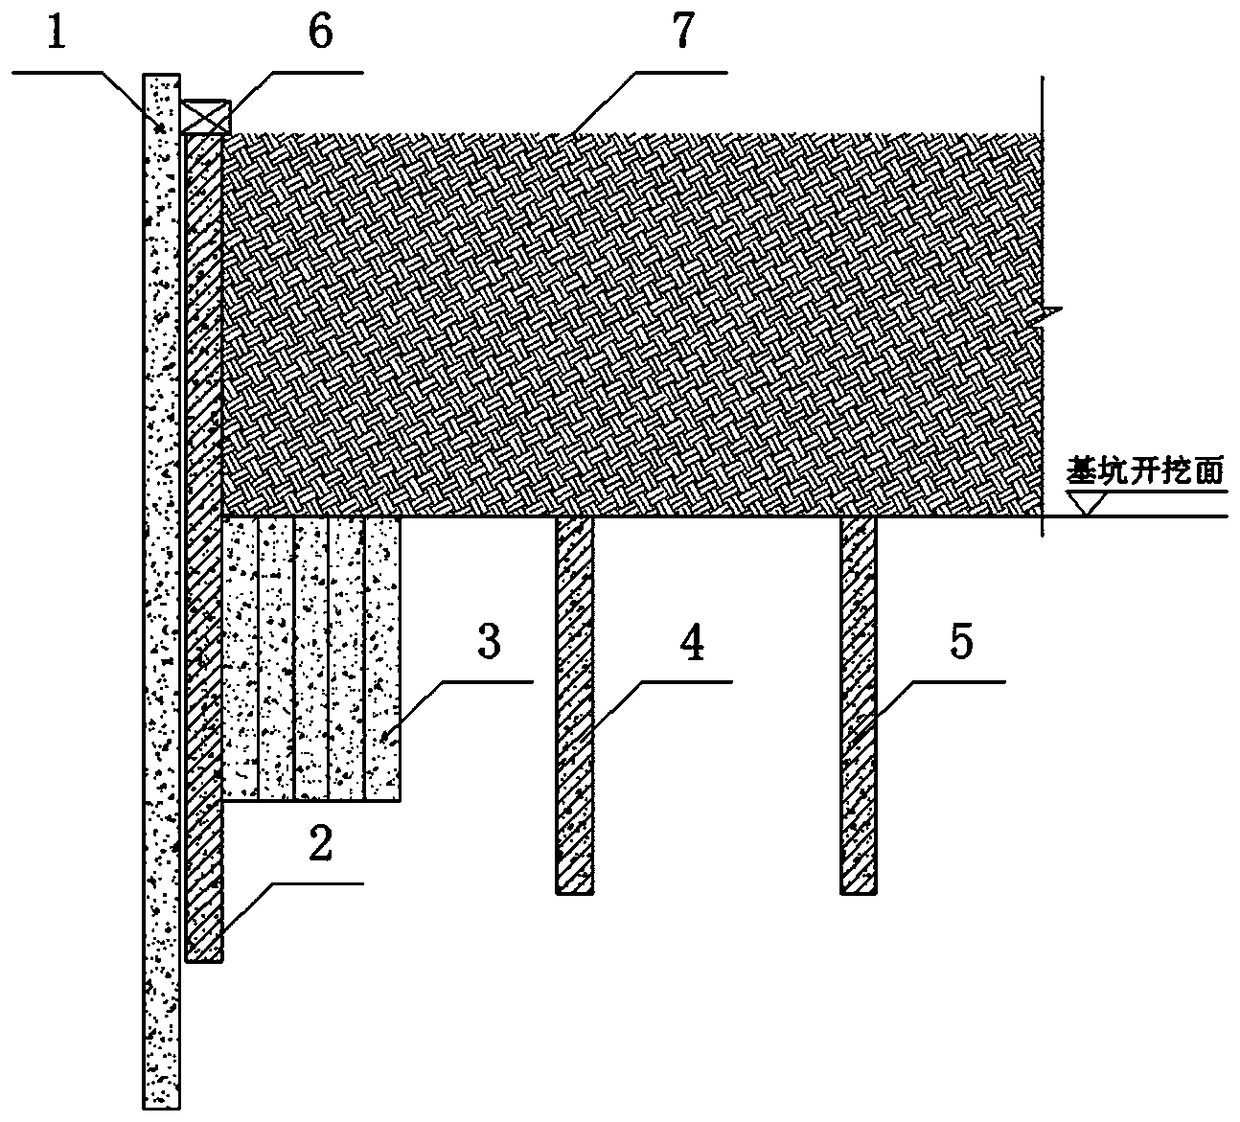 Construction method suitable for deep foundation pit support structure large in excavation area